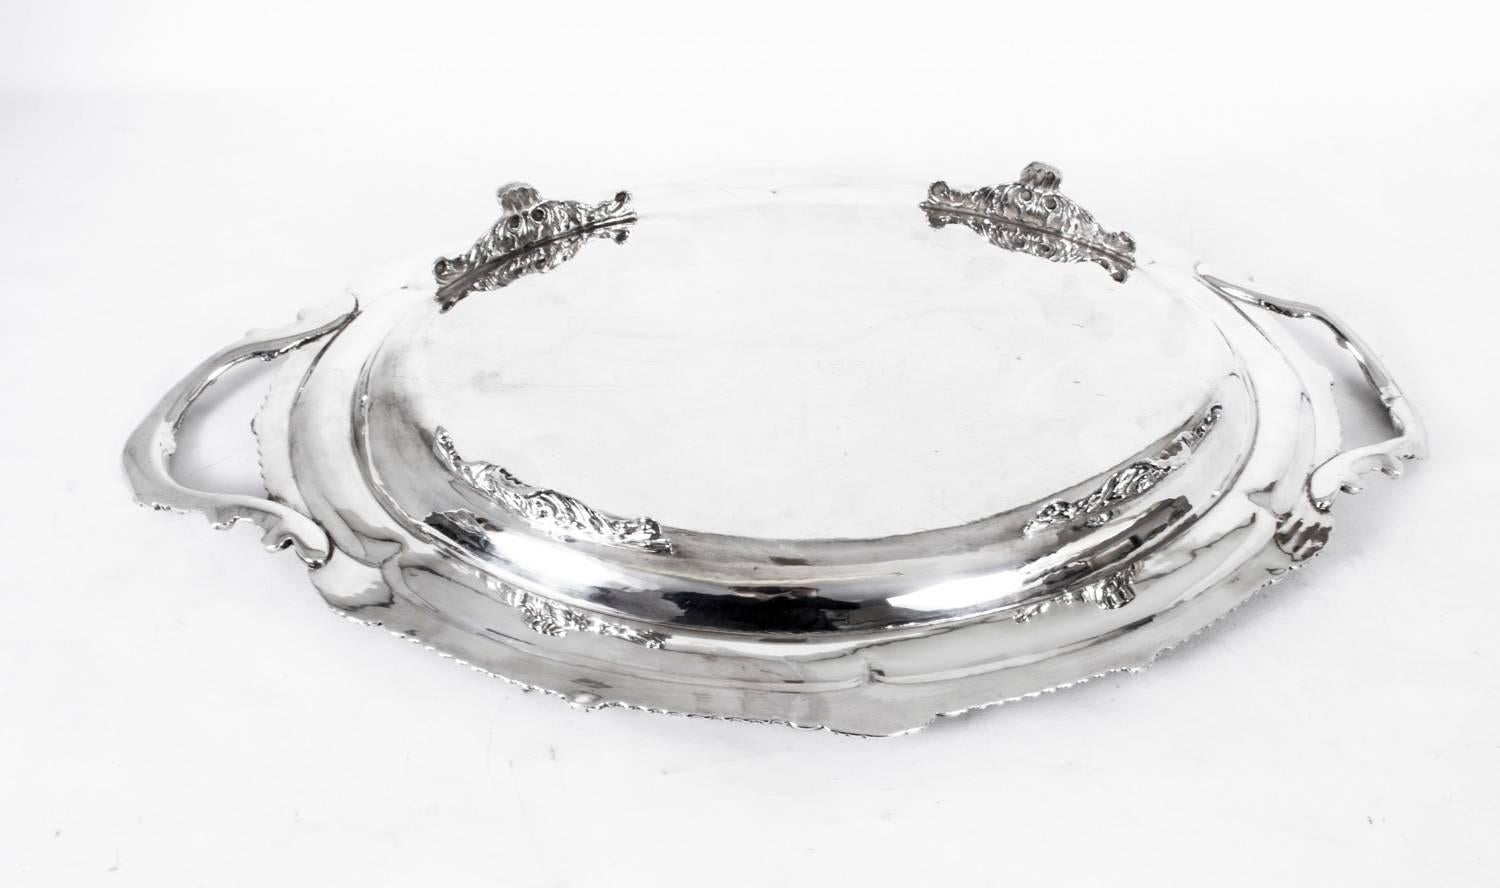 Antique Large Sterling Silver Tray by Paul Storr 1826 2